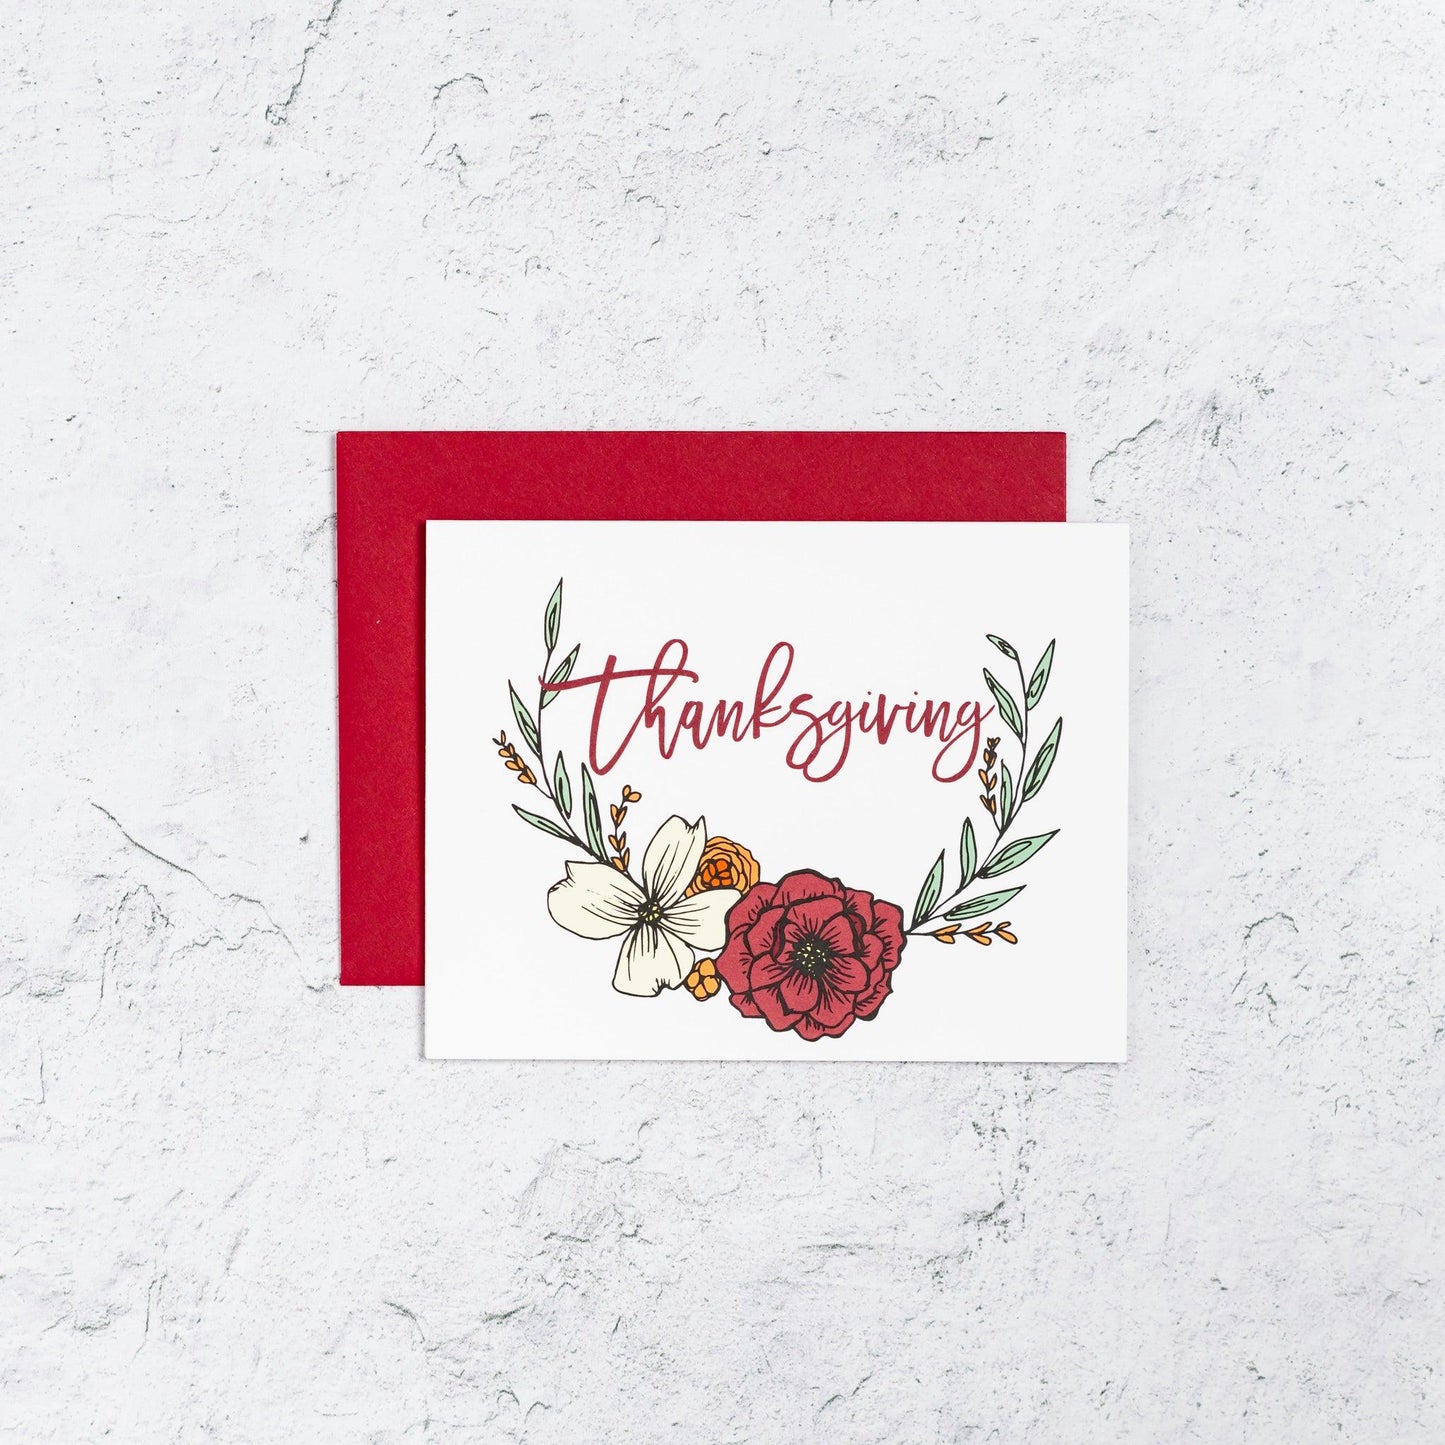 Thanksgiving Card With Floral Wreath